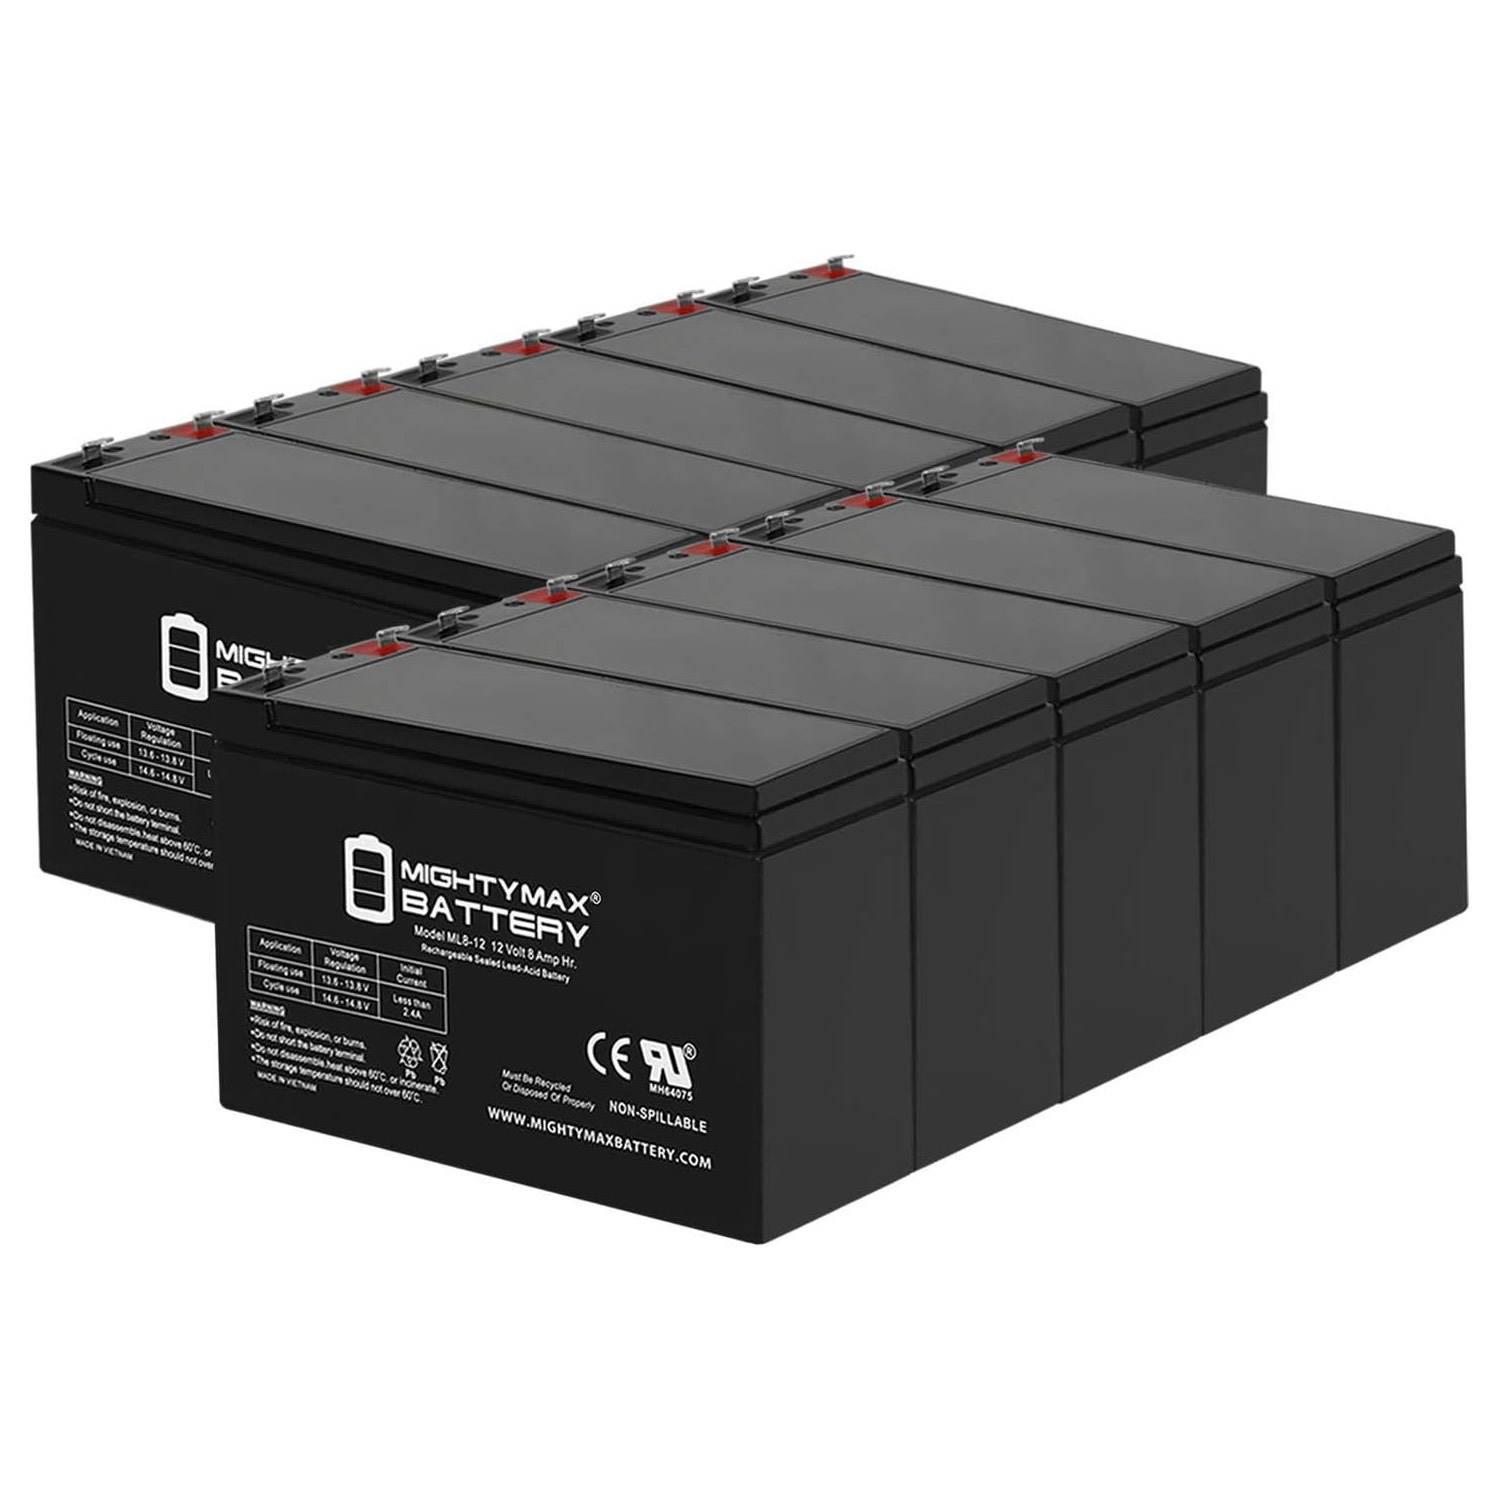 12V 8Ah Battery Replacement for APC SmartUPS RM 1500 2U - 10 Pack